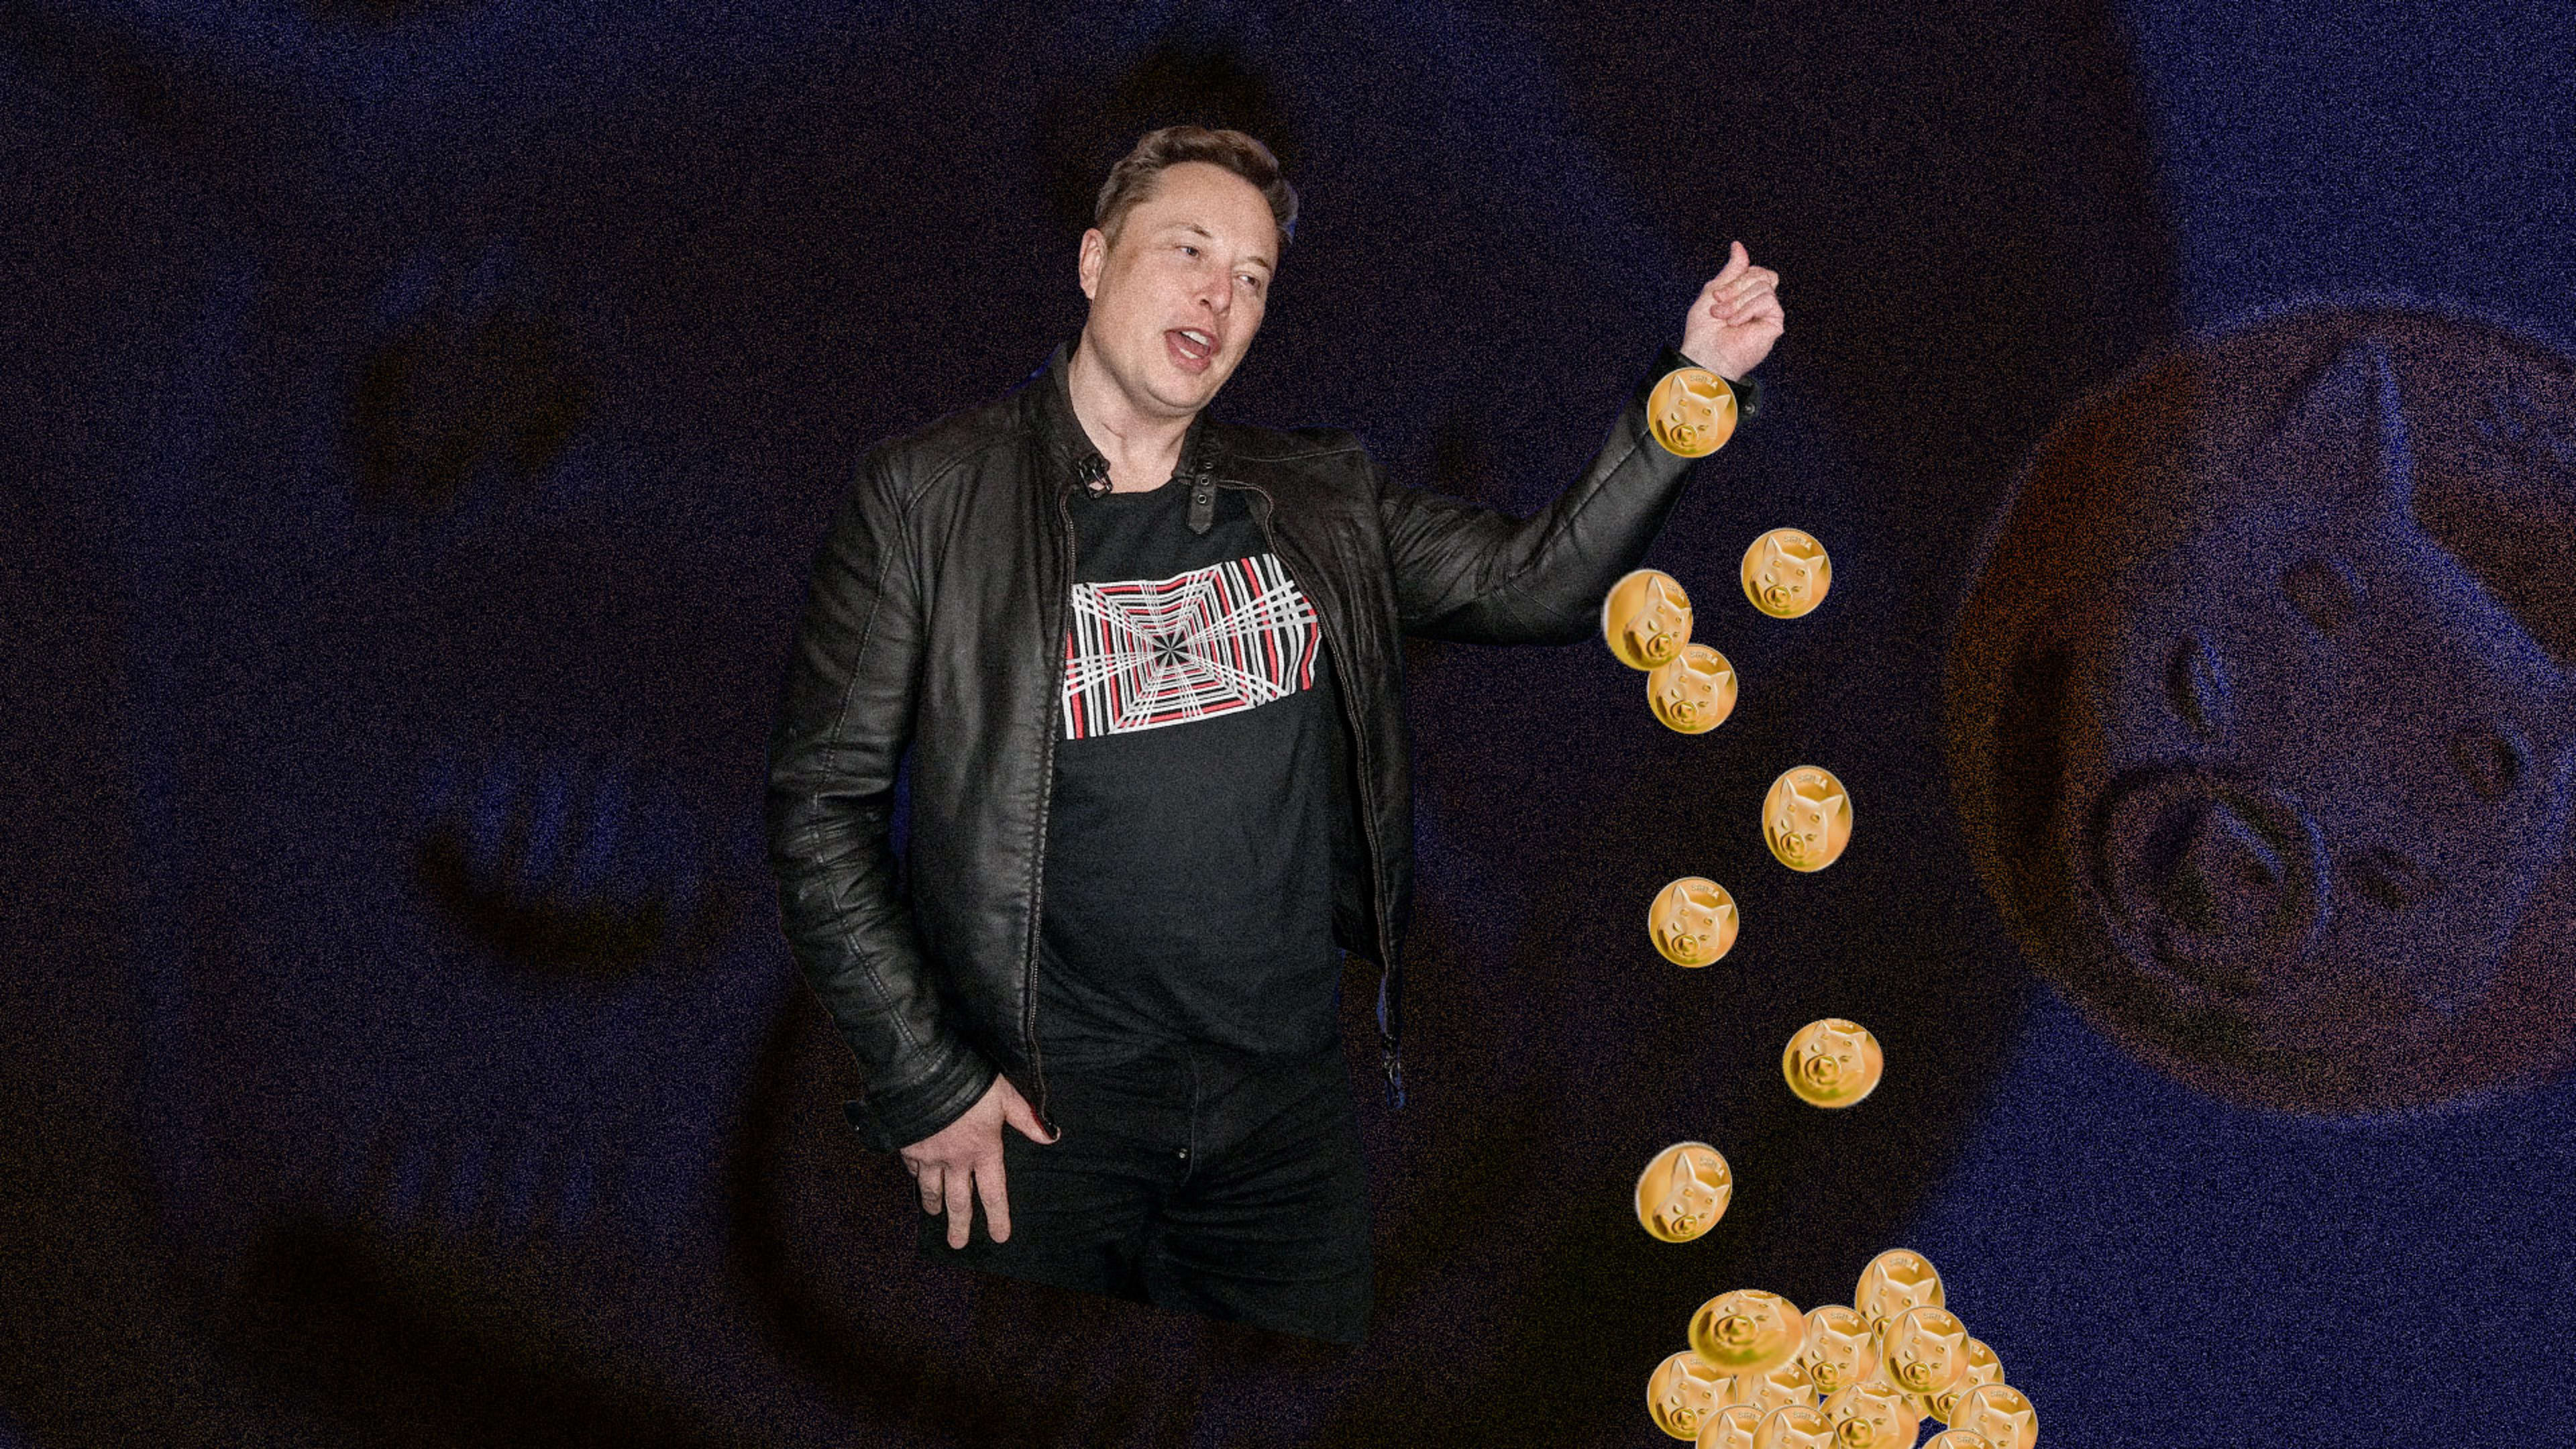 One word from Elon Musk sank the Shiba Inu (SHIB) cryptocurrency yesterday